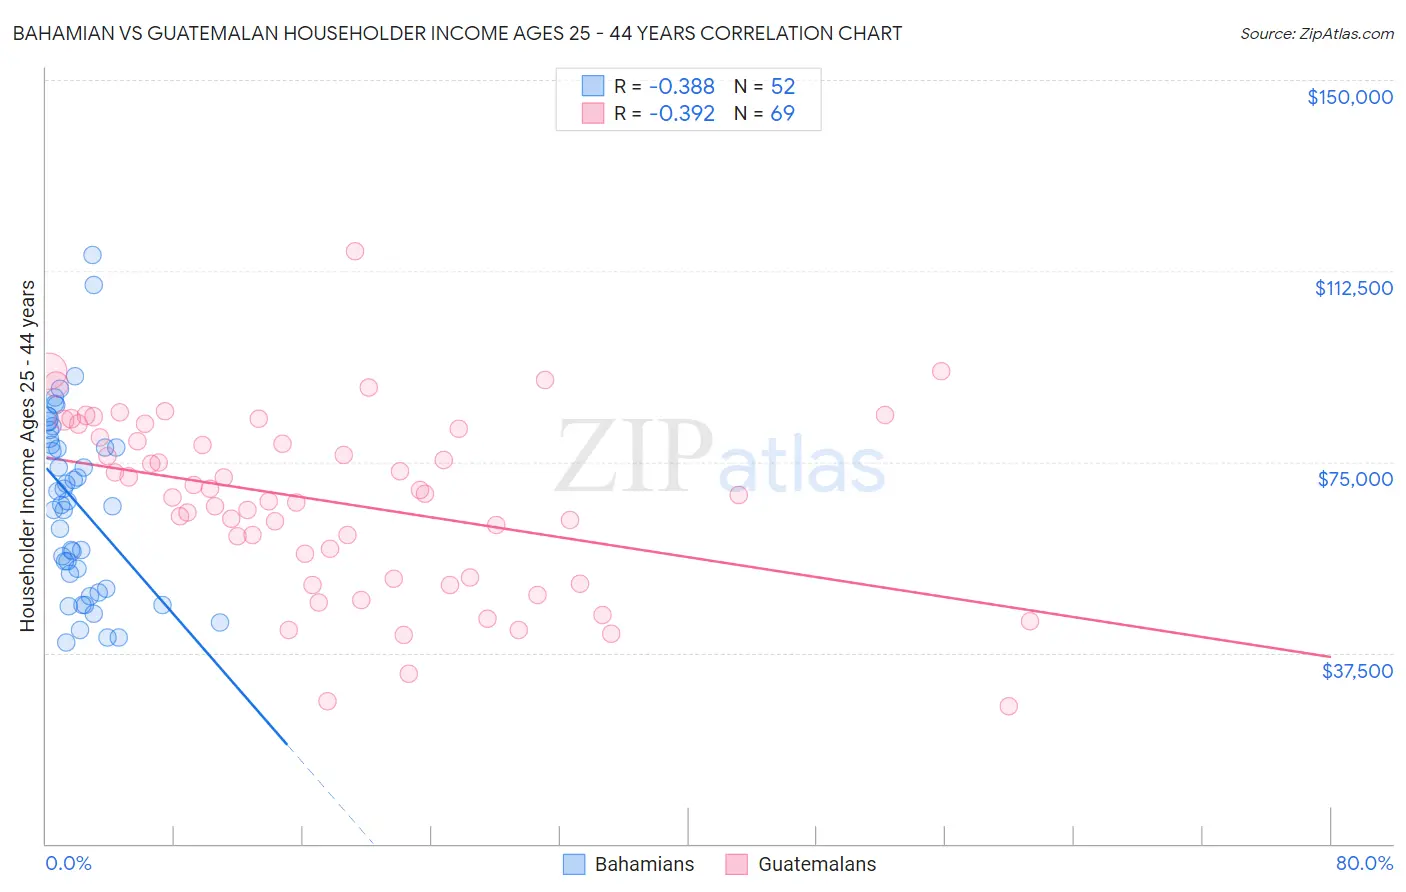 Bahamian vs Guatemalan Householder Income Ages 25 - 44 years